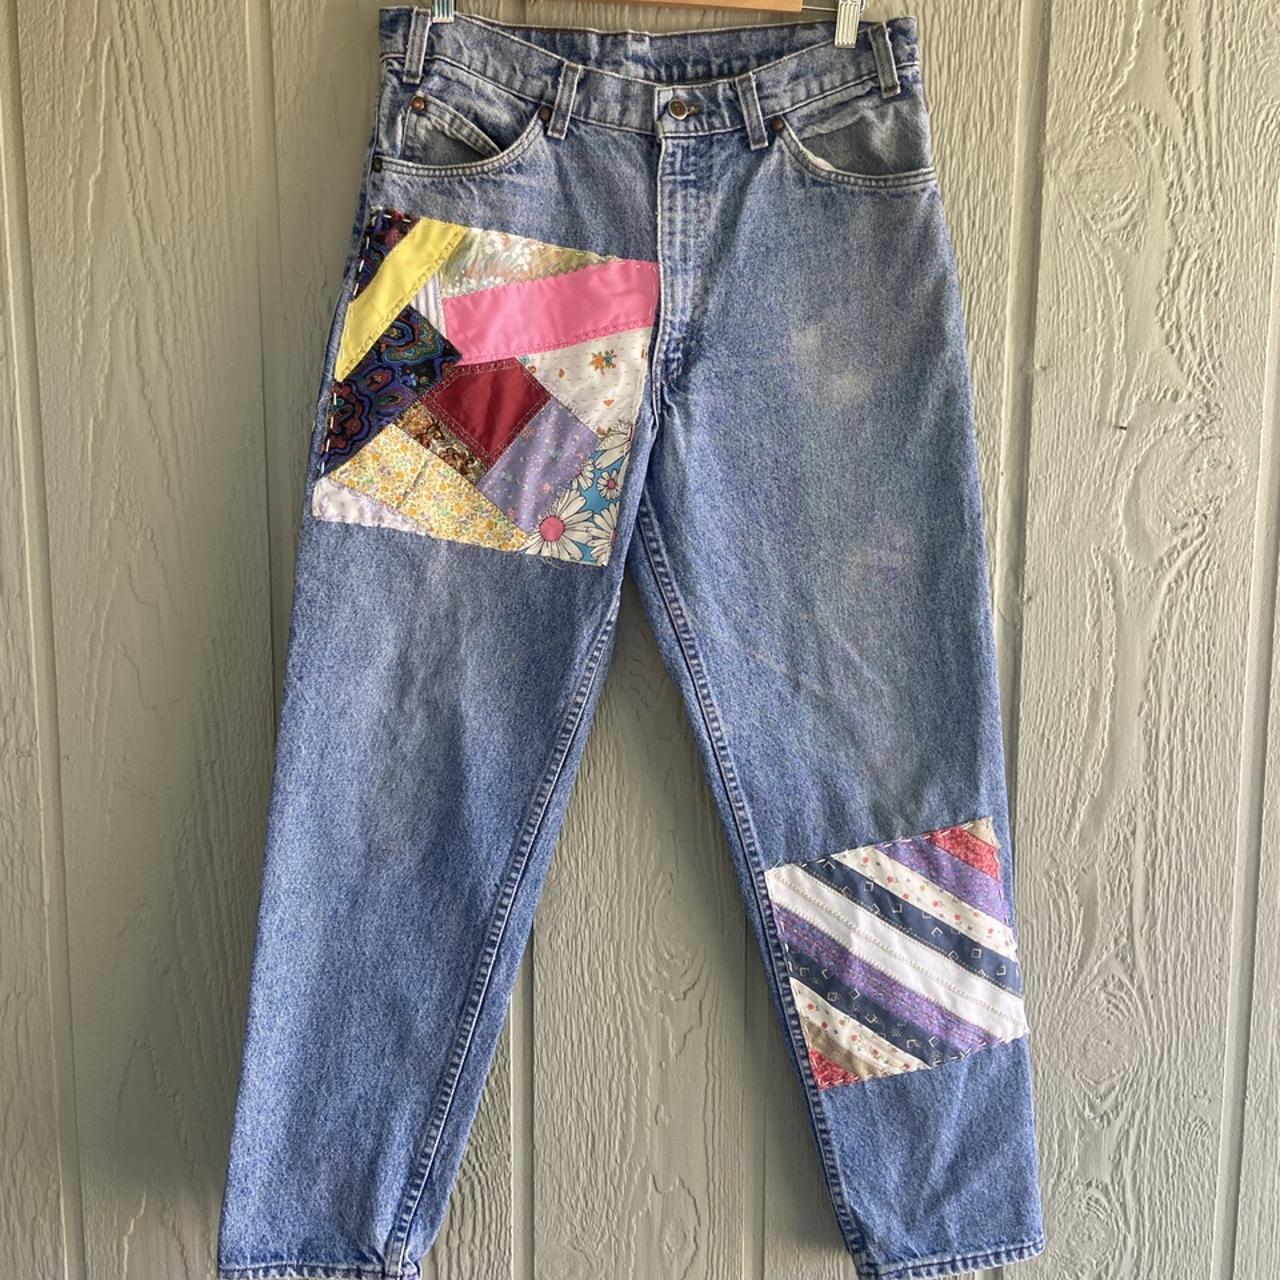 Patchwork jeans  Upcycle jeans, Patched jeans diy, How to patch jeans